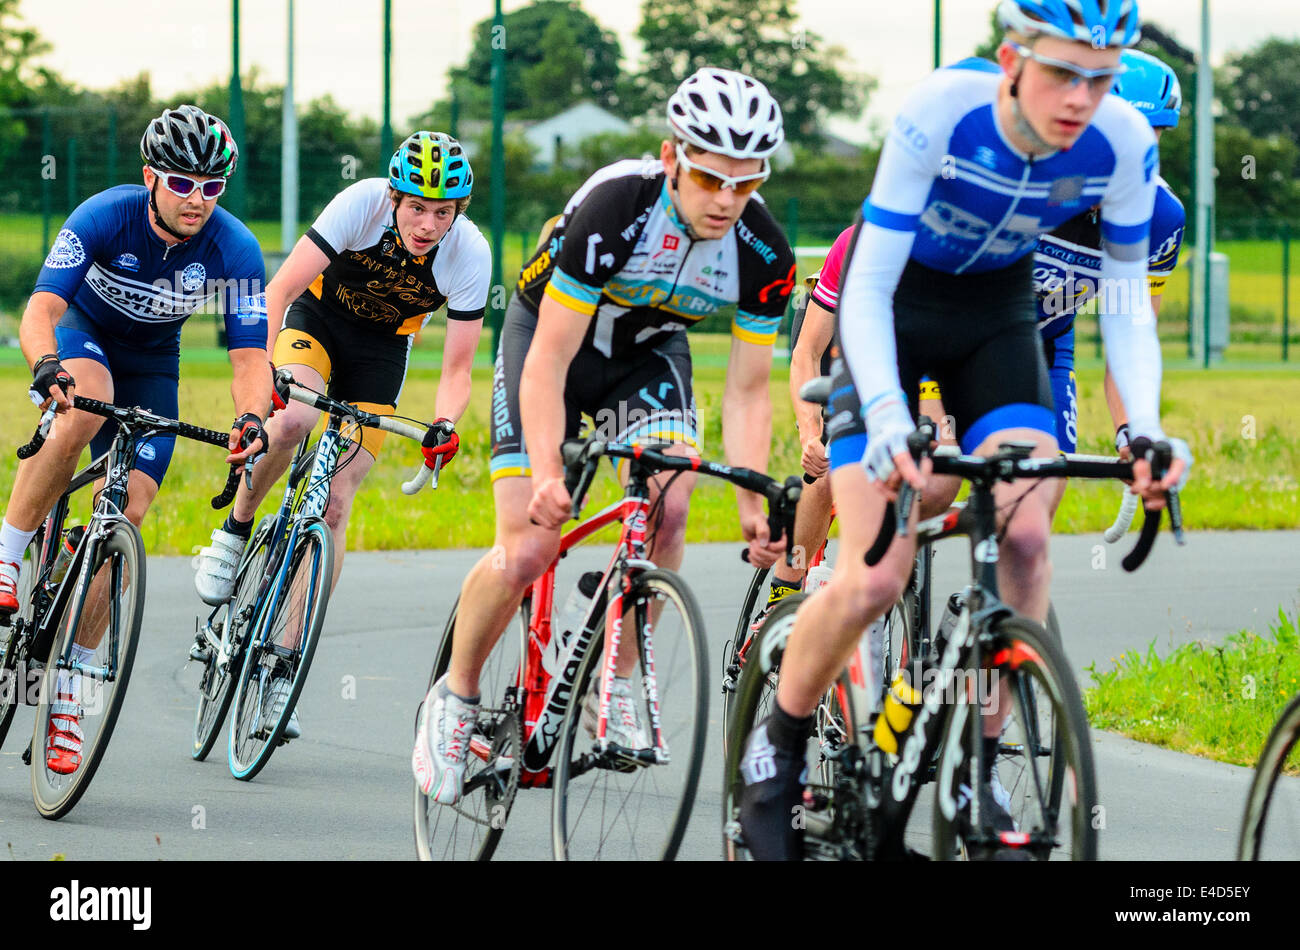 Cyclists racing in criterium event on dedicated cycle circuit at York Sport Village York Yorkshire Stock Photo